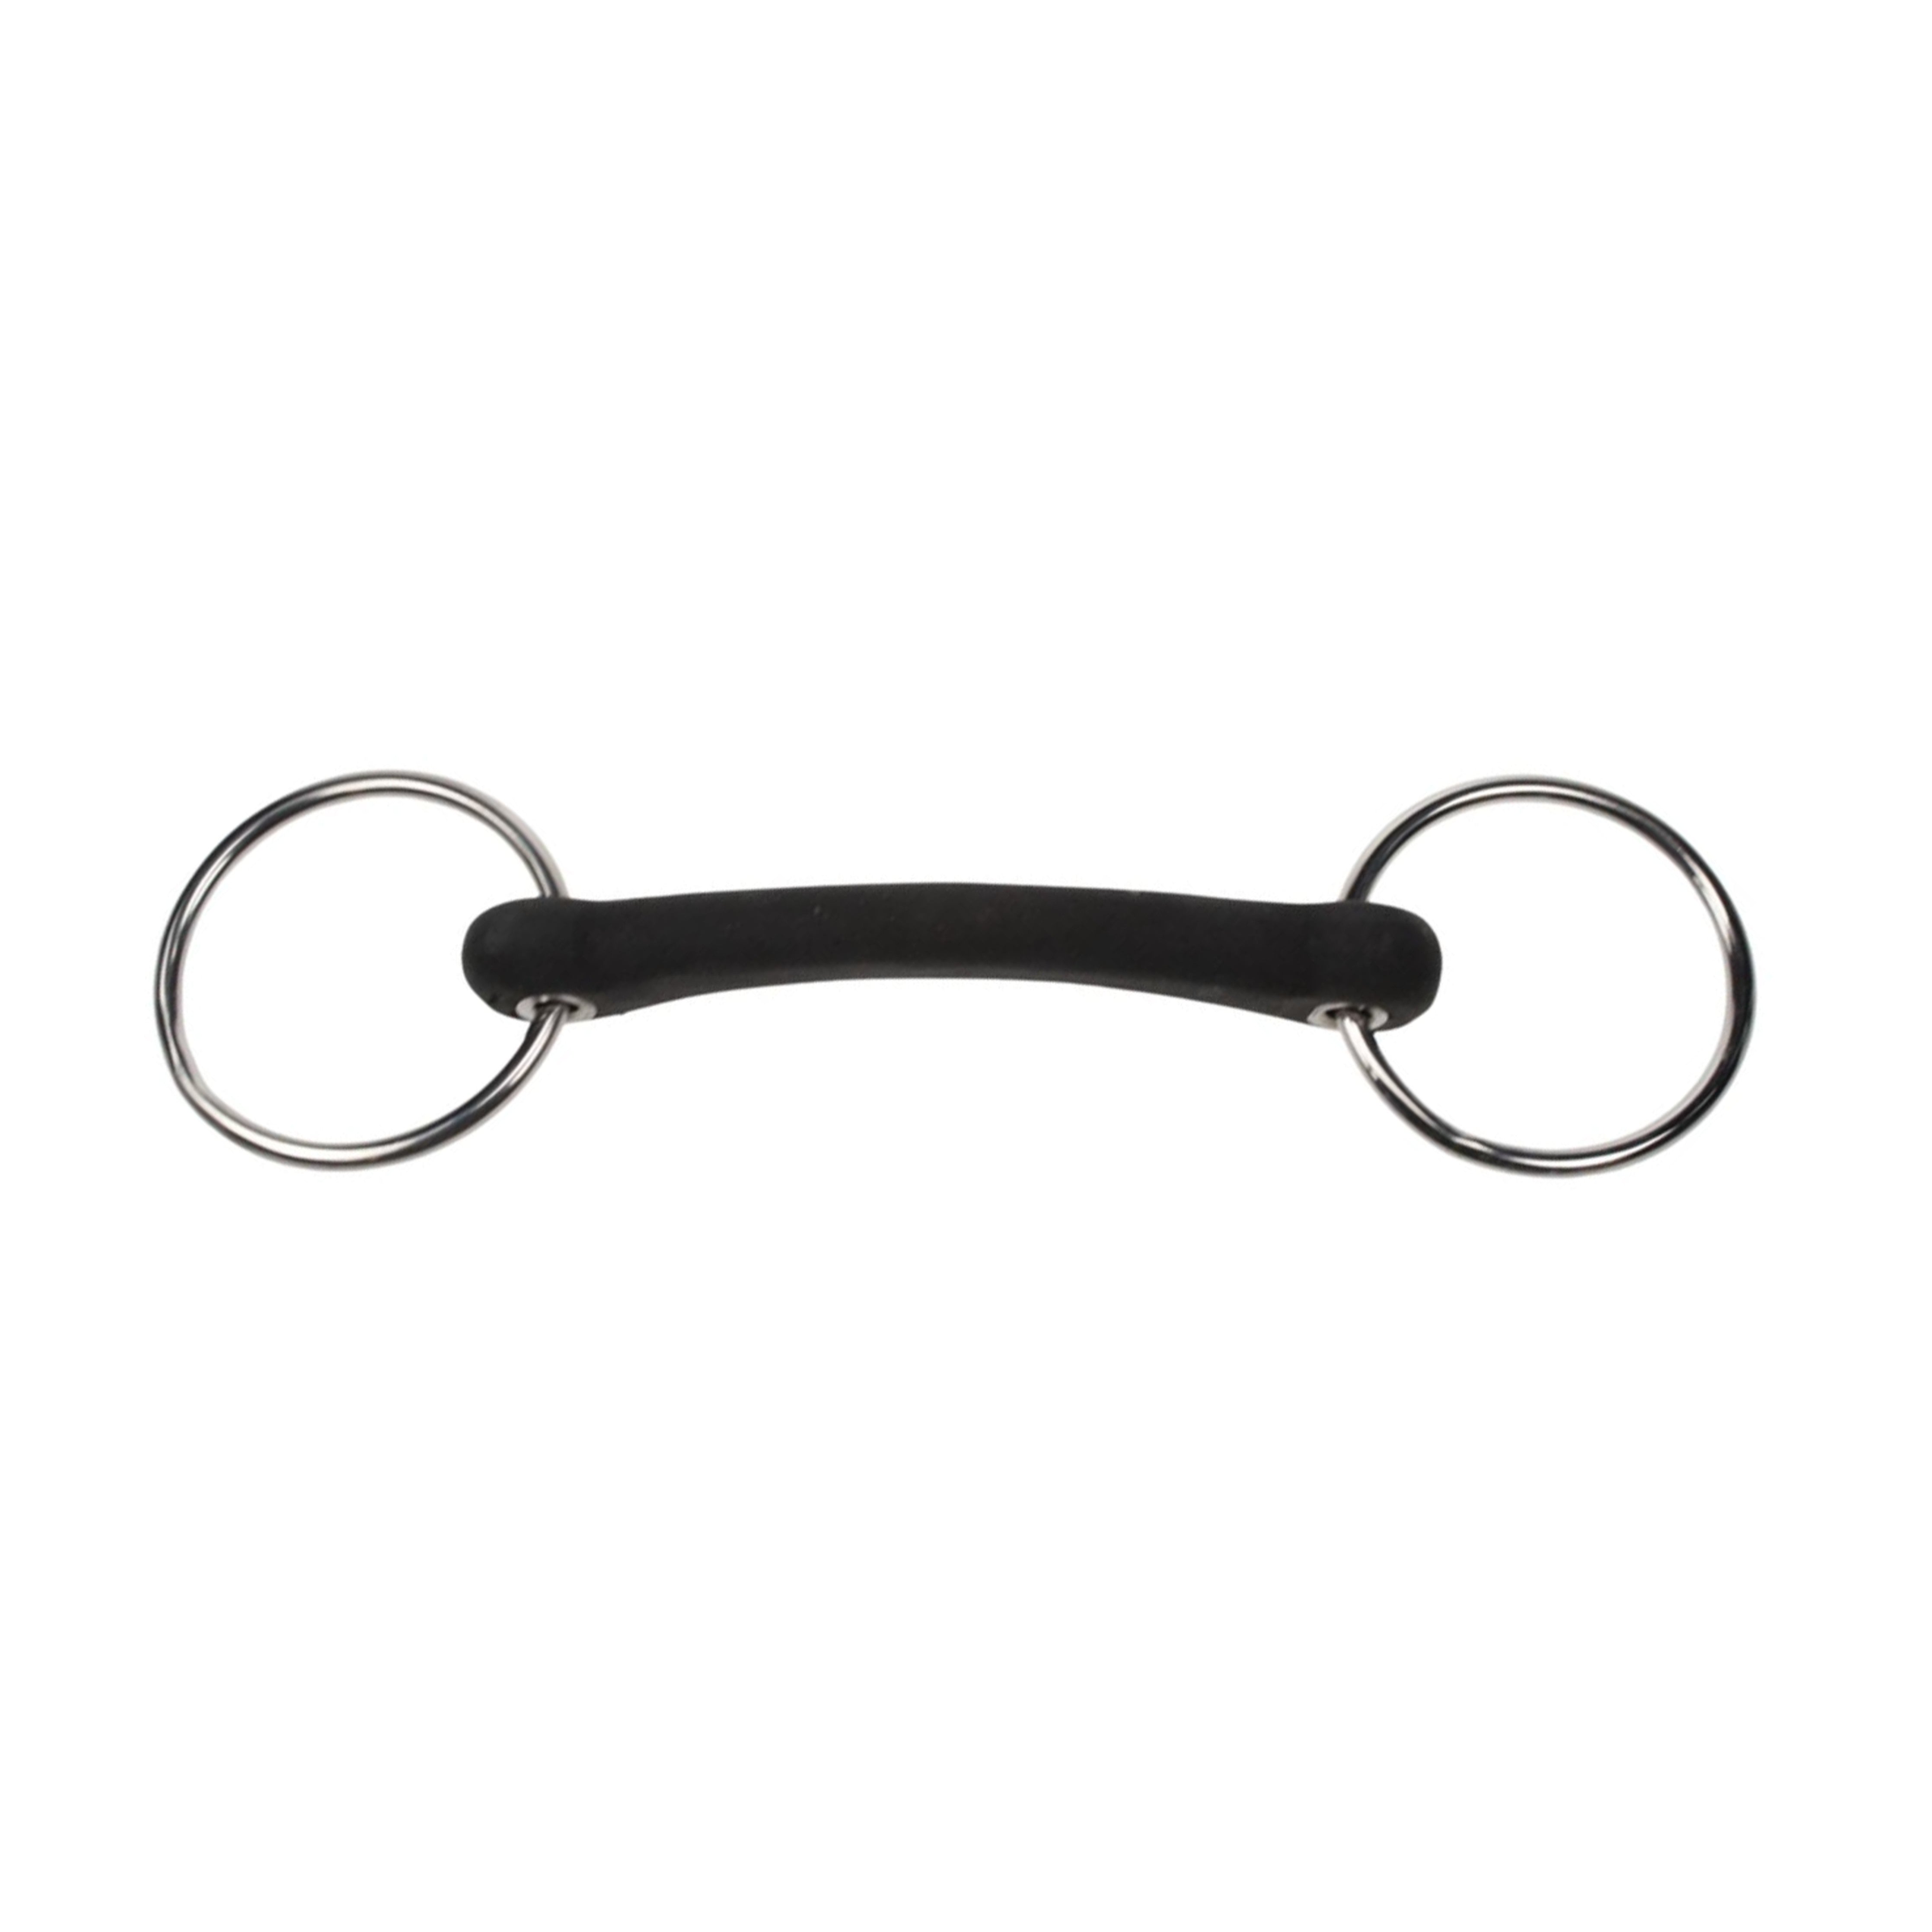 Abbey Bit Soft Rubber Loose Ring